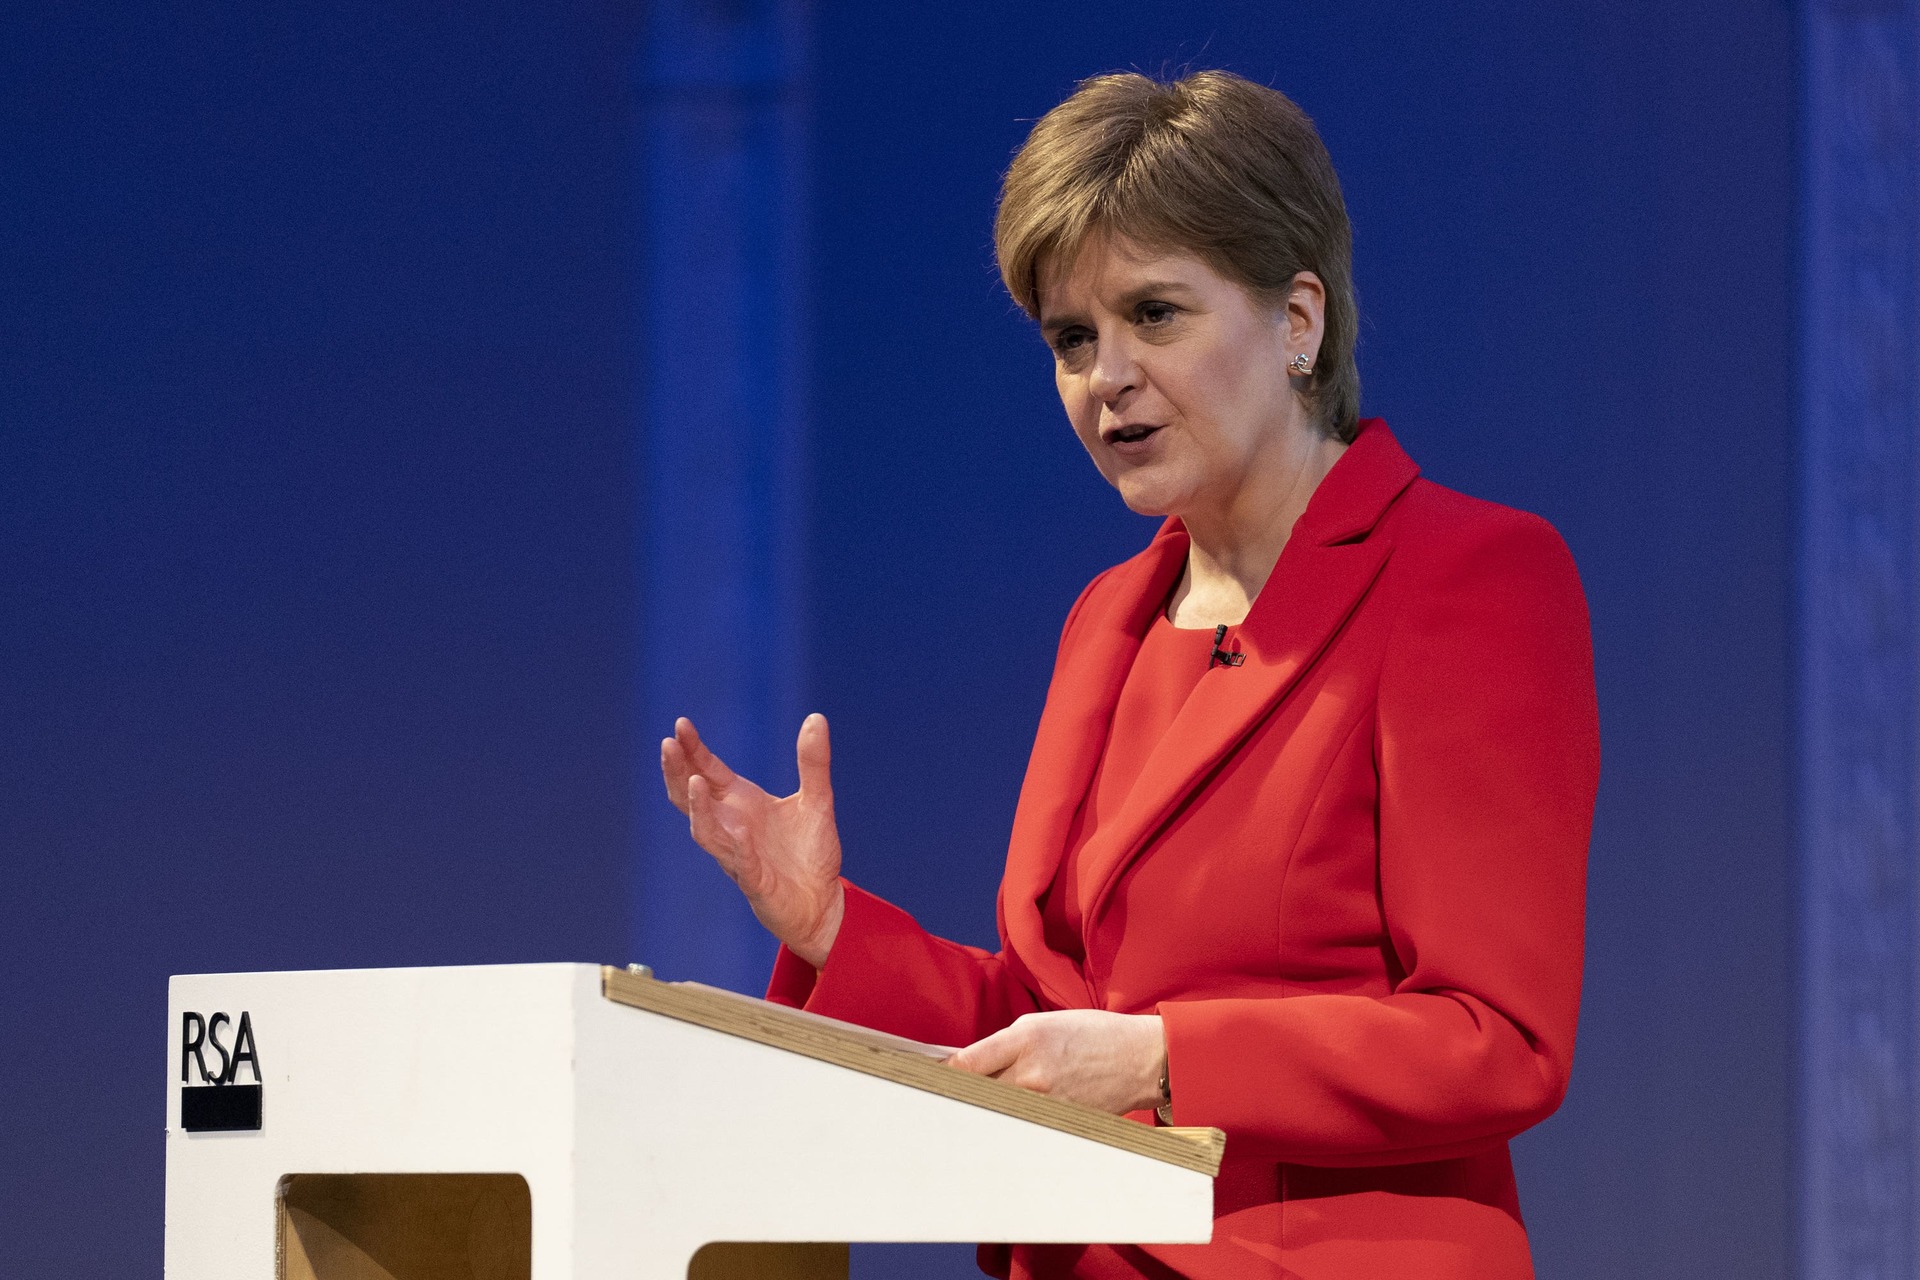 Nicola Sturgeon’s popularity has increased in the past month, according to the poll.